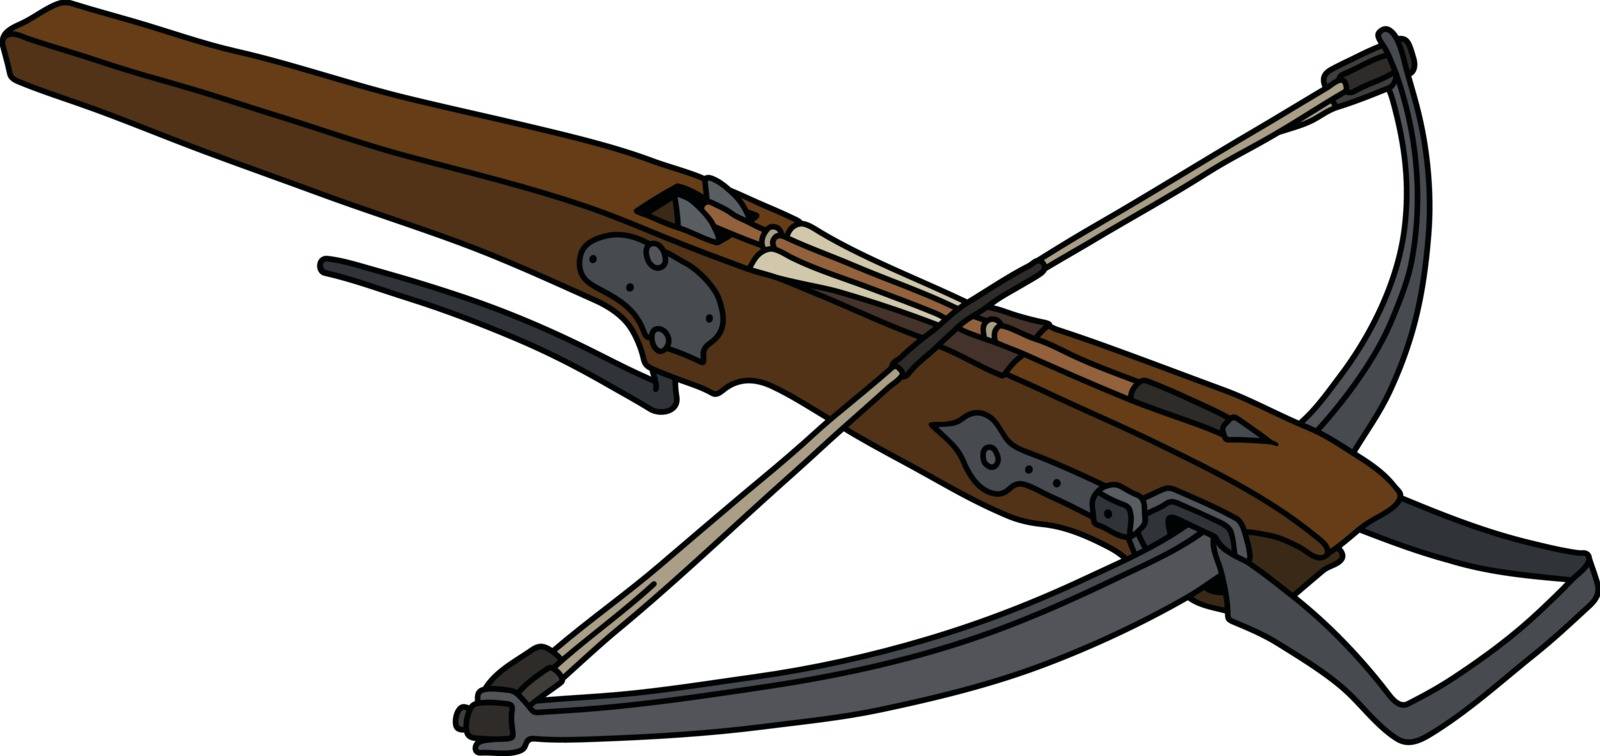 The historical wooden crossbow by vostal